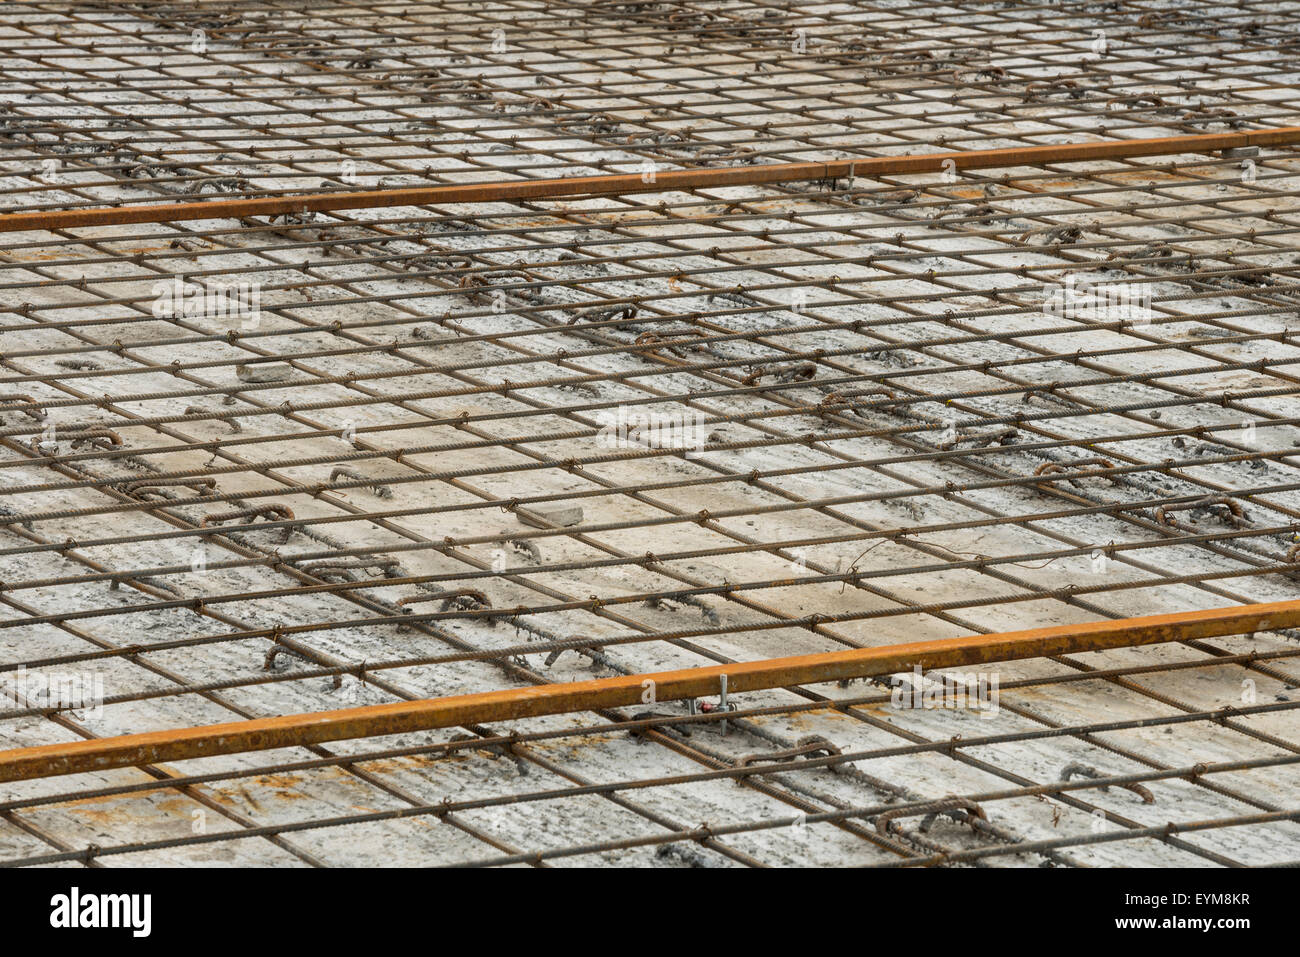 Metal Rods At Construction Site Stock Photo